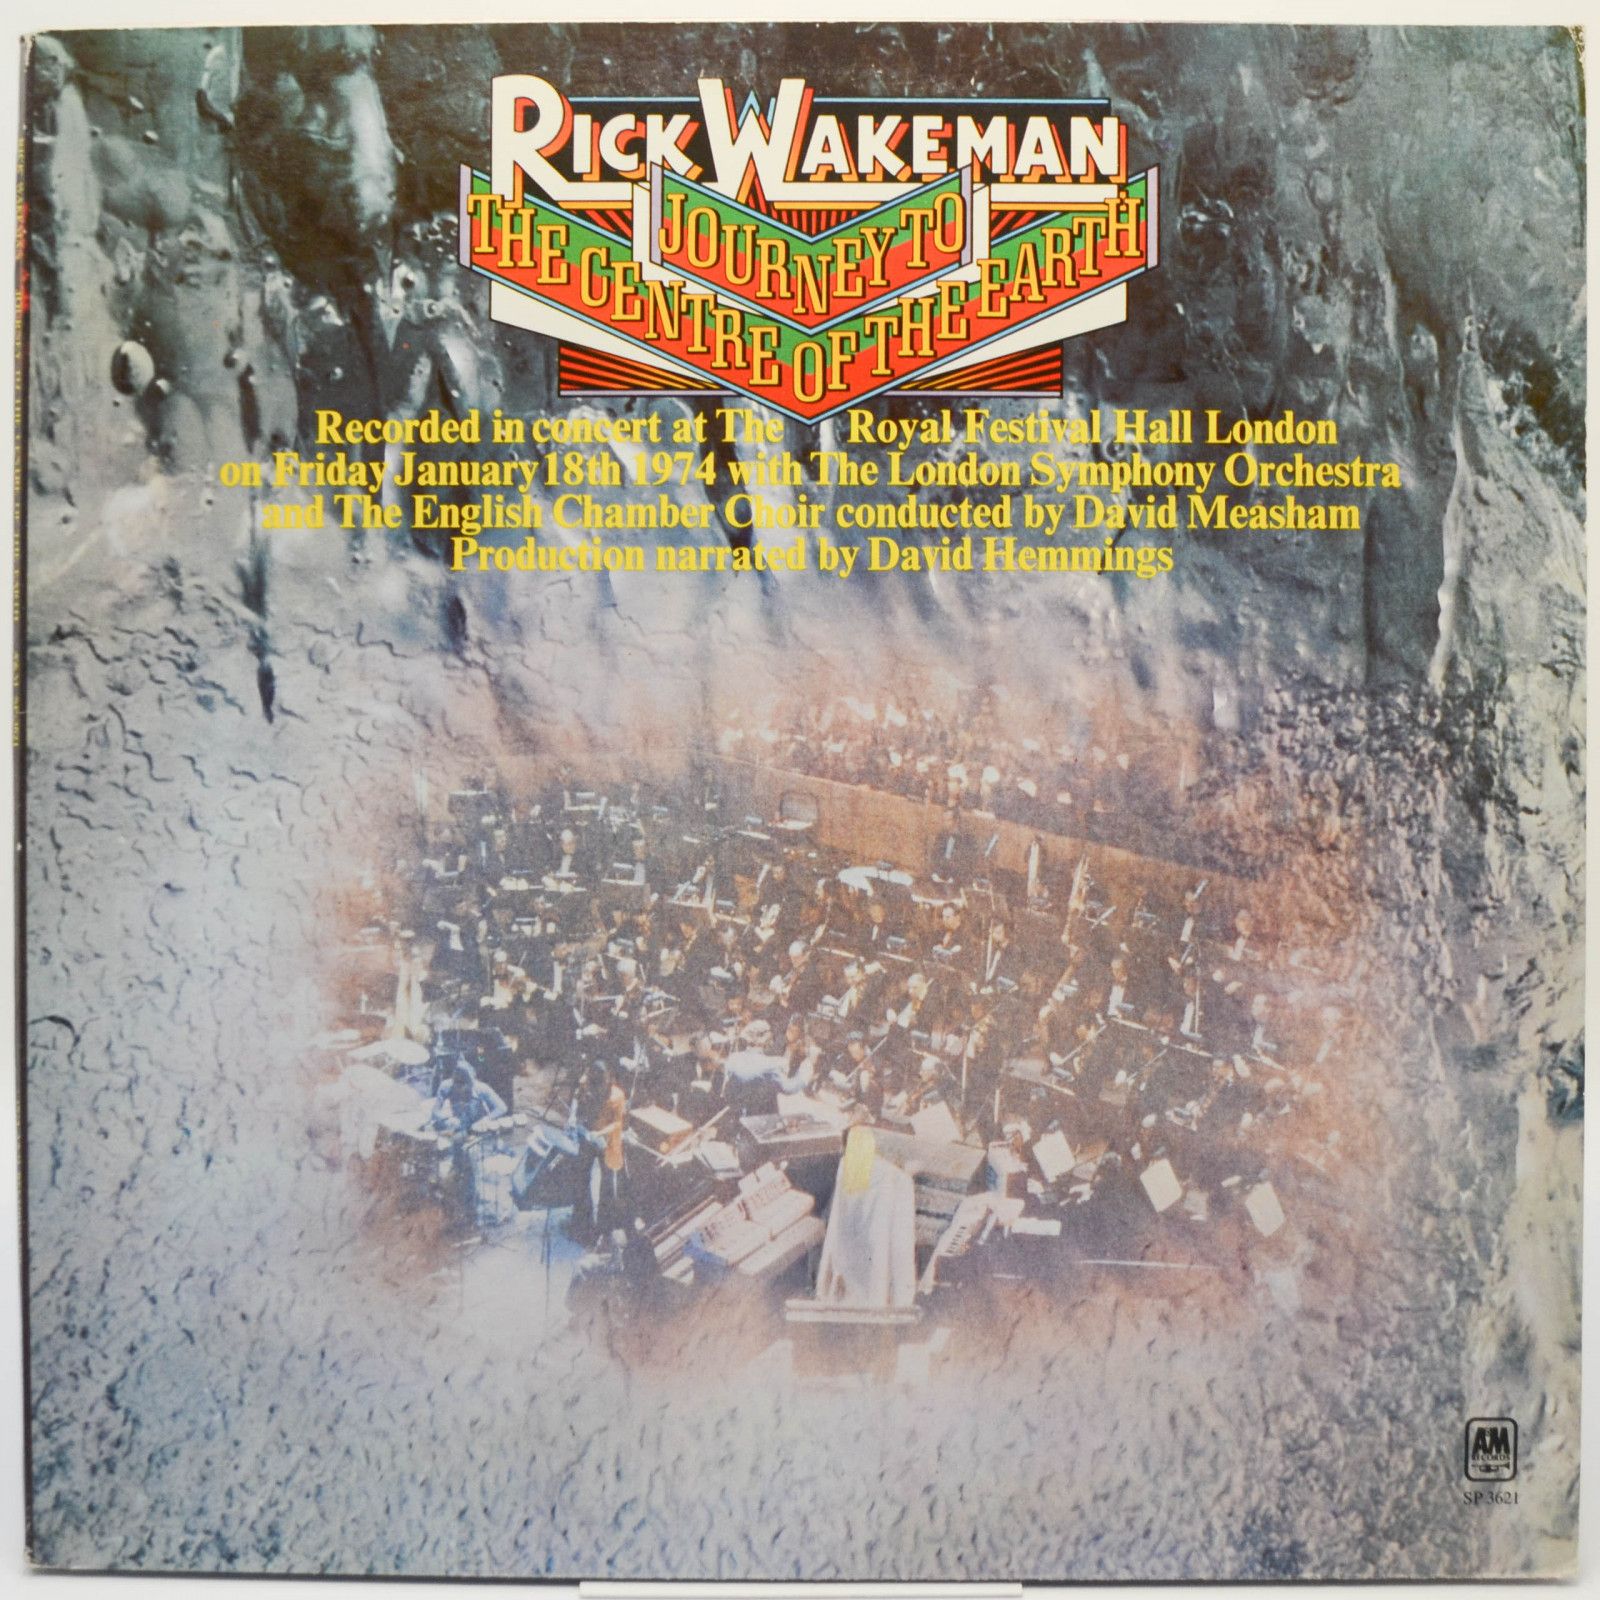 Rick Wakeman — Journey To The Centre Of The Earth, 1974